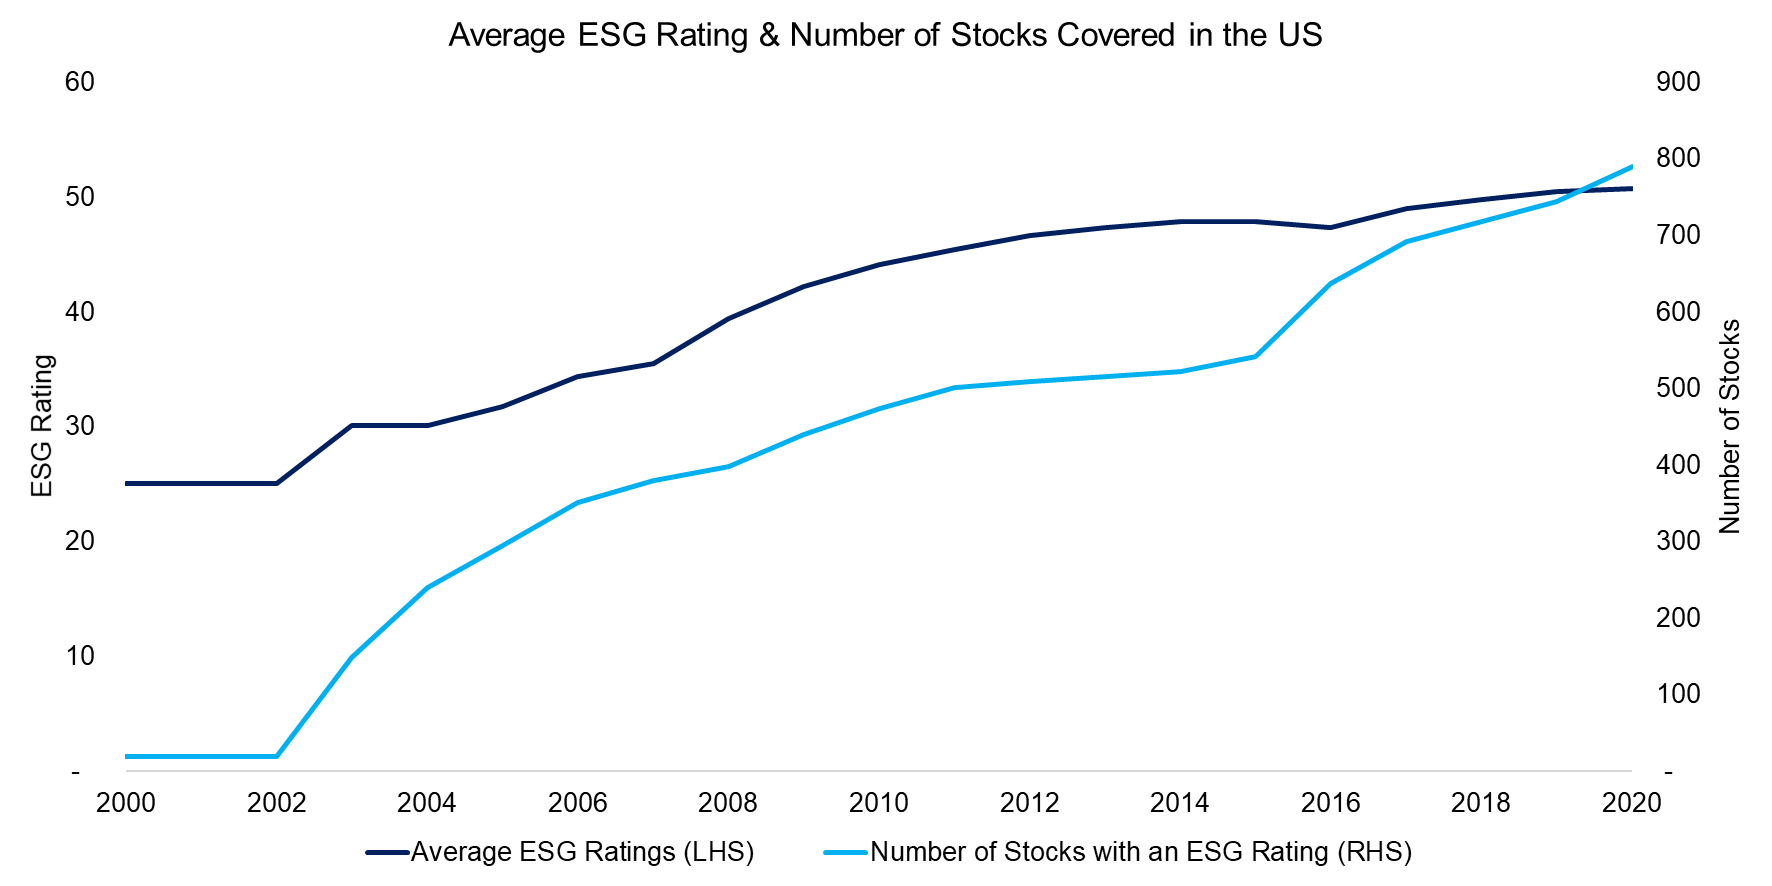 Average ESG Rating & Number of Stocks Covered in the US